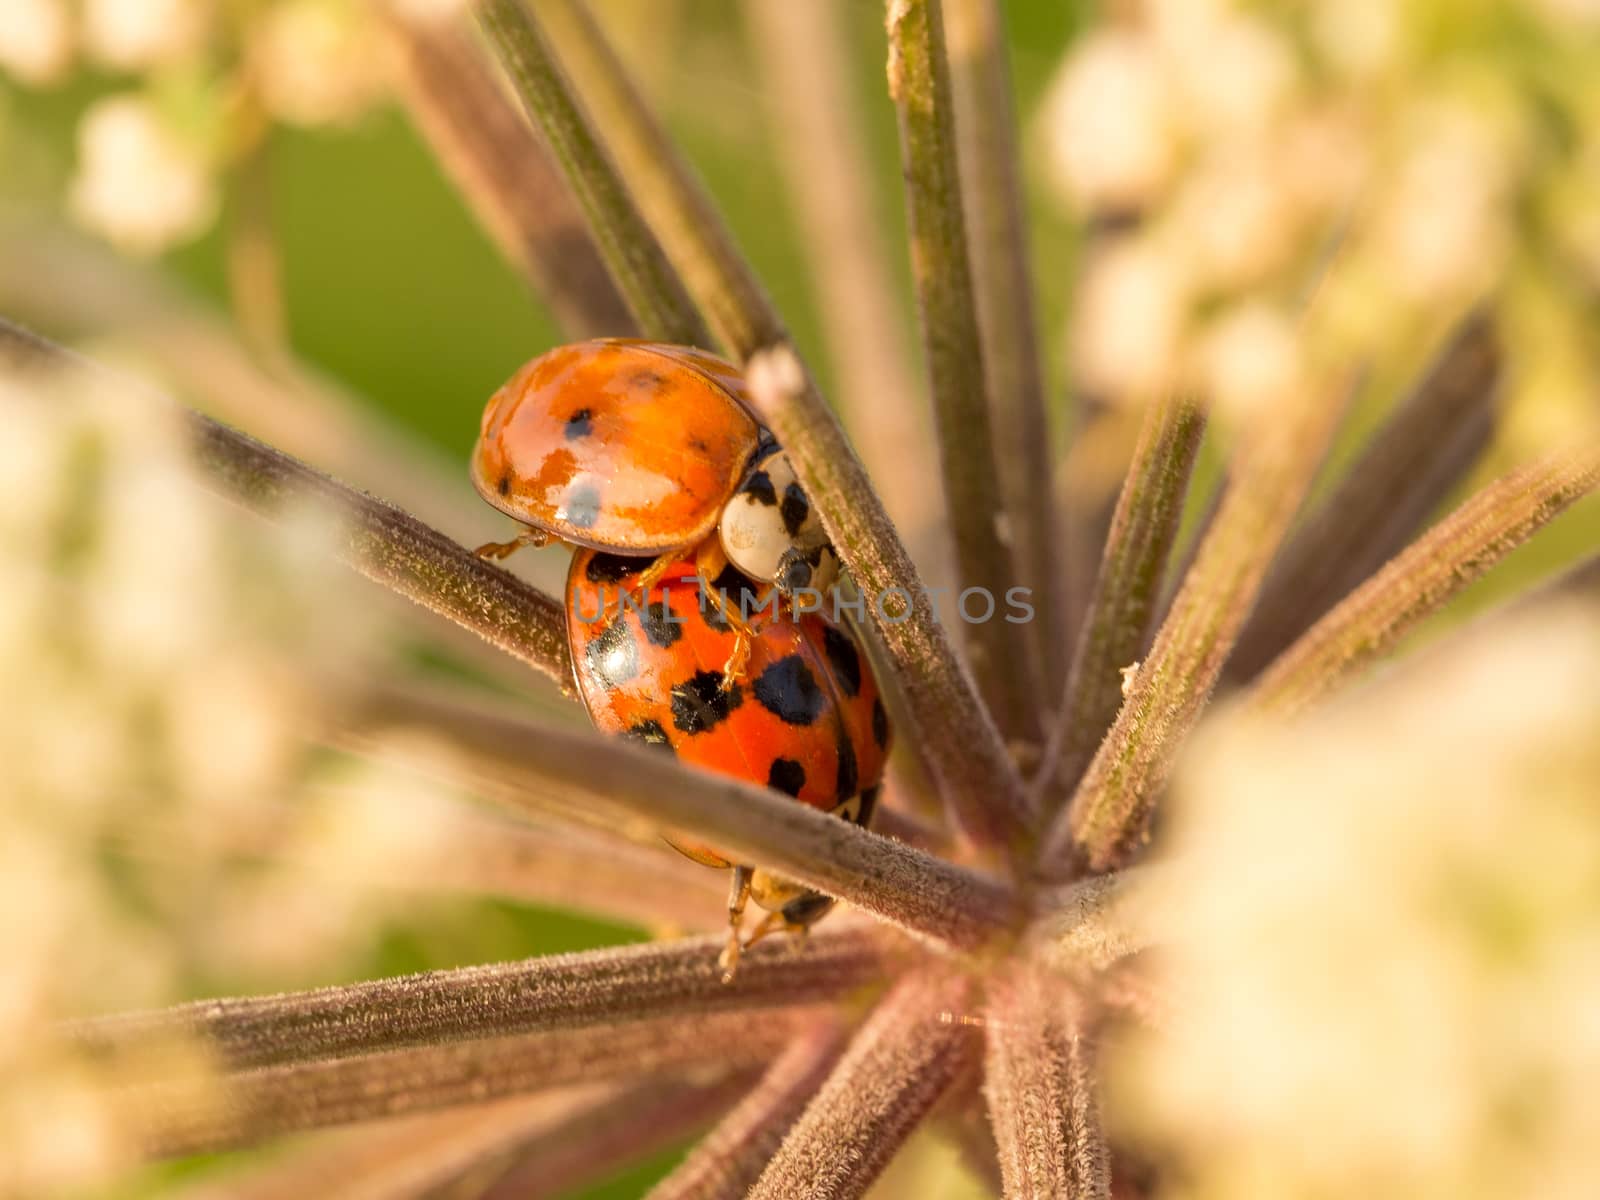 Two ladybirds trying to find safe haven right in the middle of this beautiful and peaceful flower.